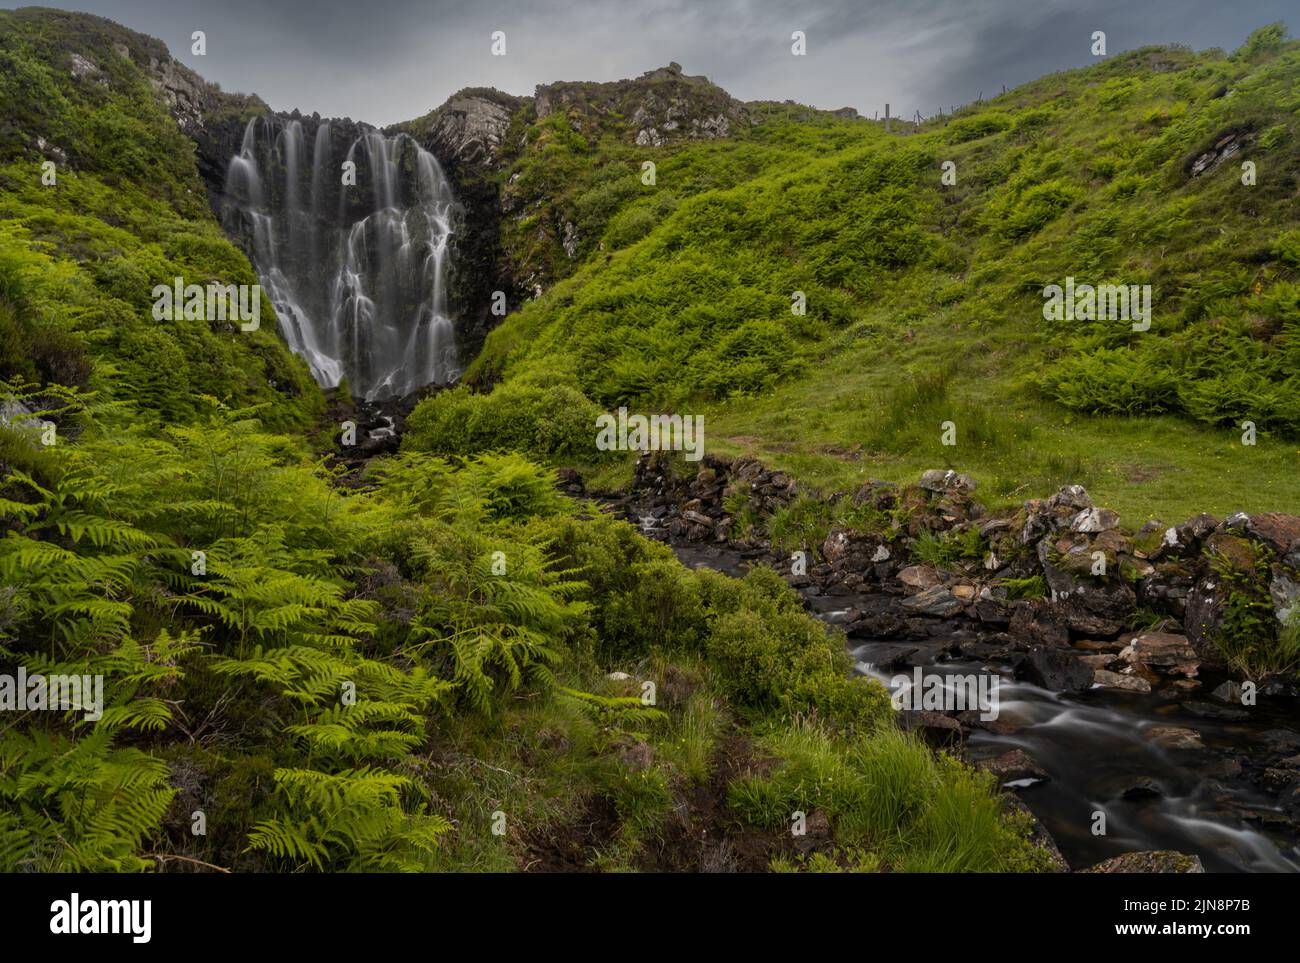 A view of the Clashniesse Waterfall in the Scottish Highlands in high summer with lush green ferns in the foreground Stock Photo